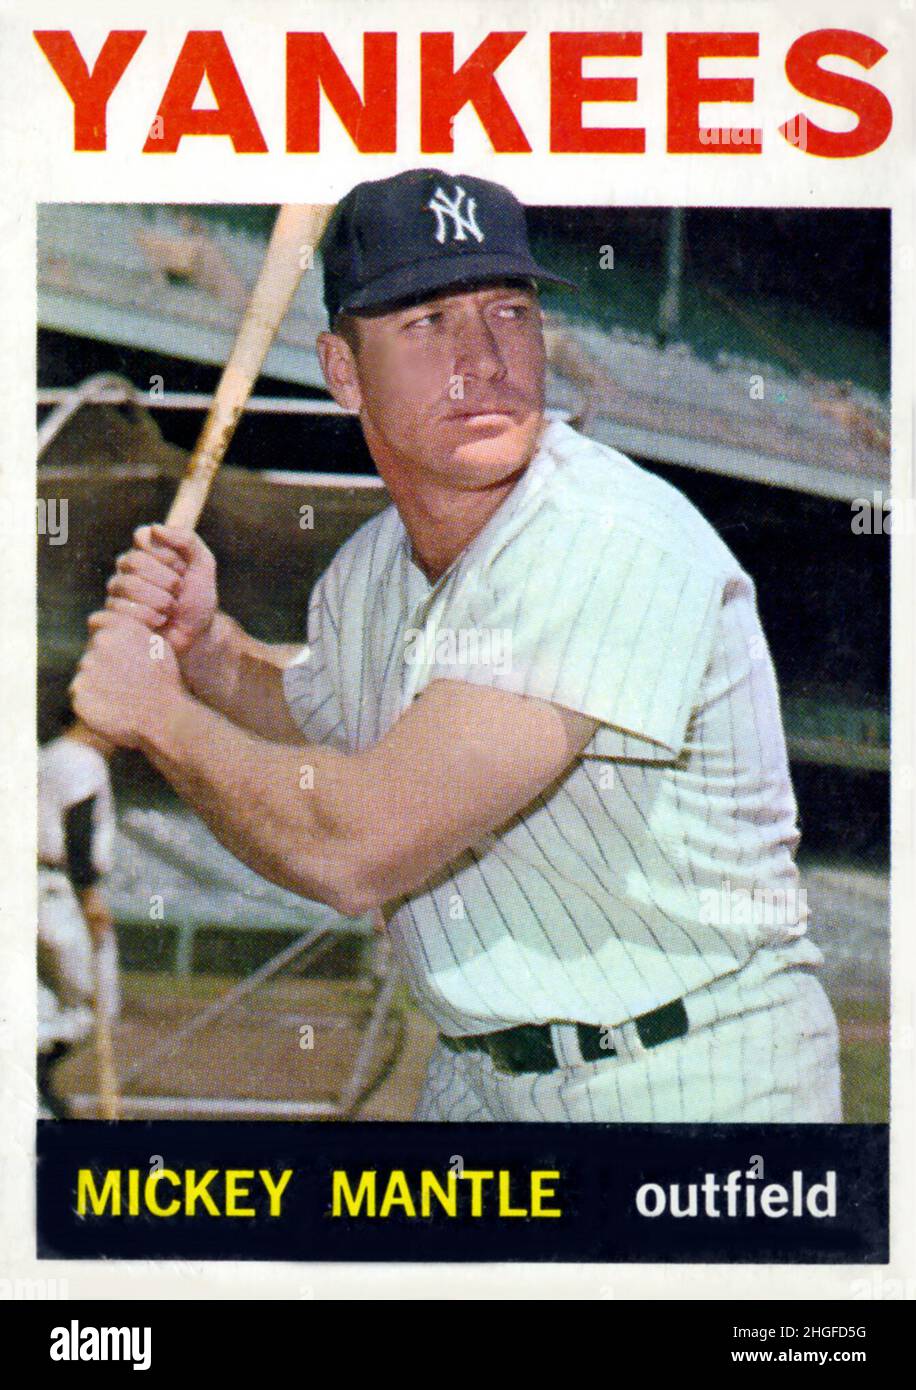 A 1964 Topps baseball card depicting Hall of Fame player Mickey Mantle with the New York Yankees. Stock Photo